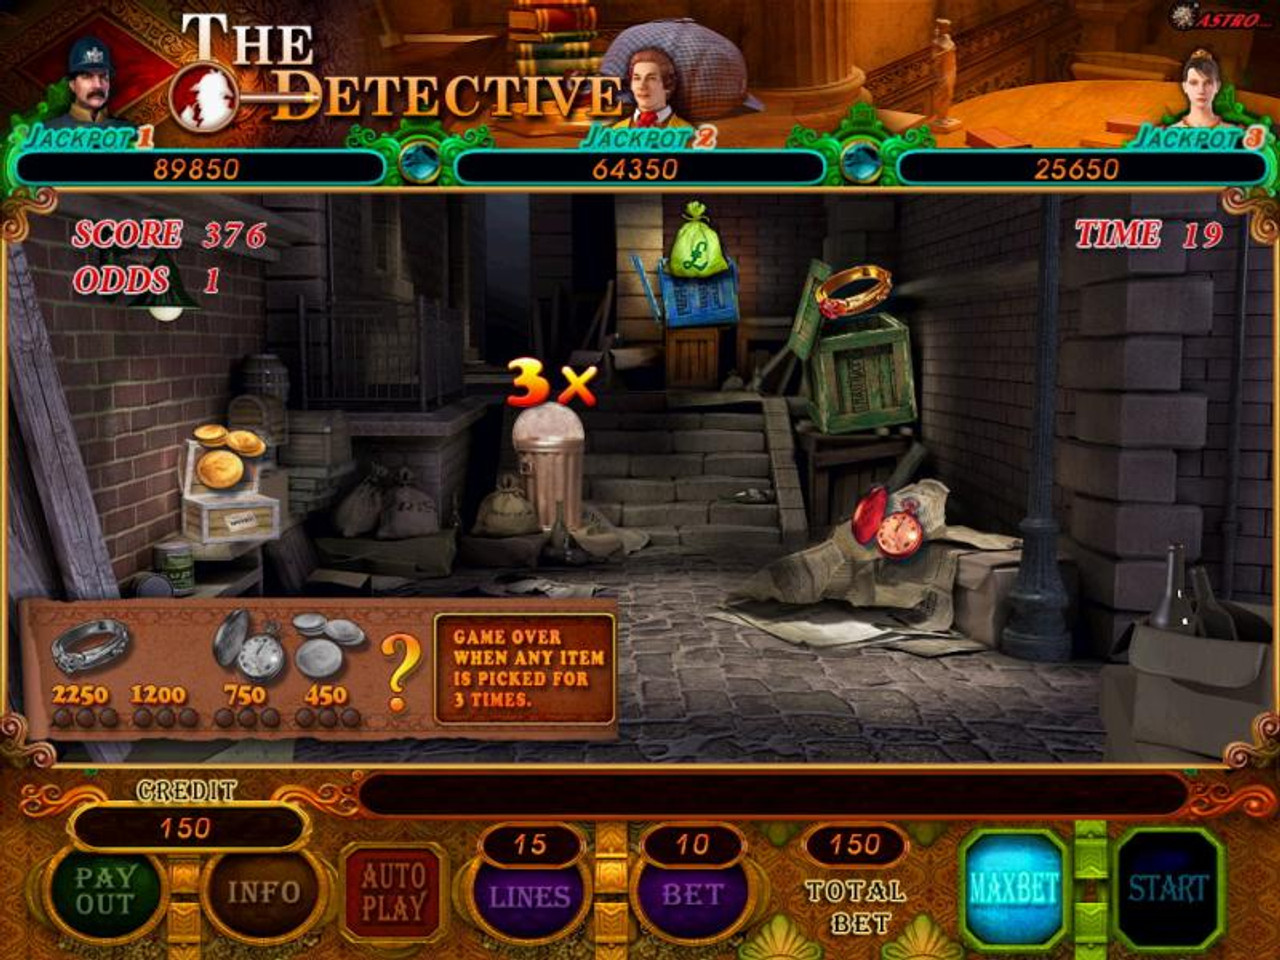 The Detective Game By Astro - VGA 15 Liner - Great Lakes Amusement